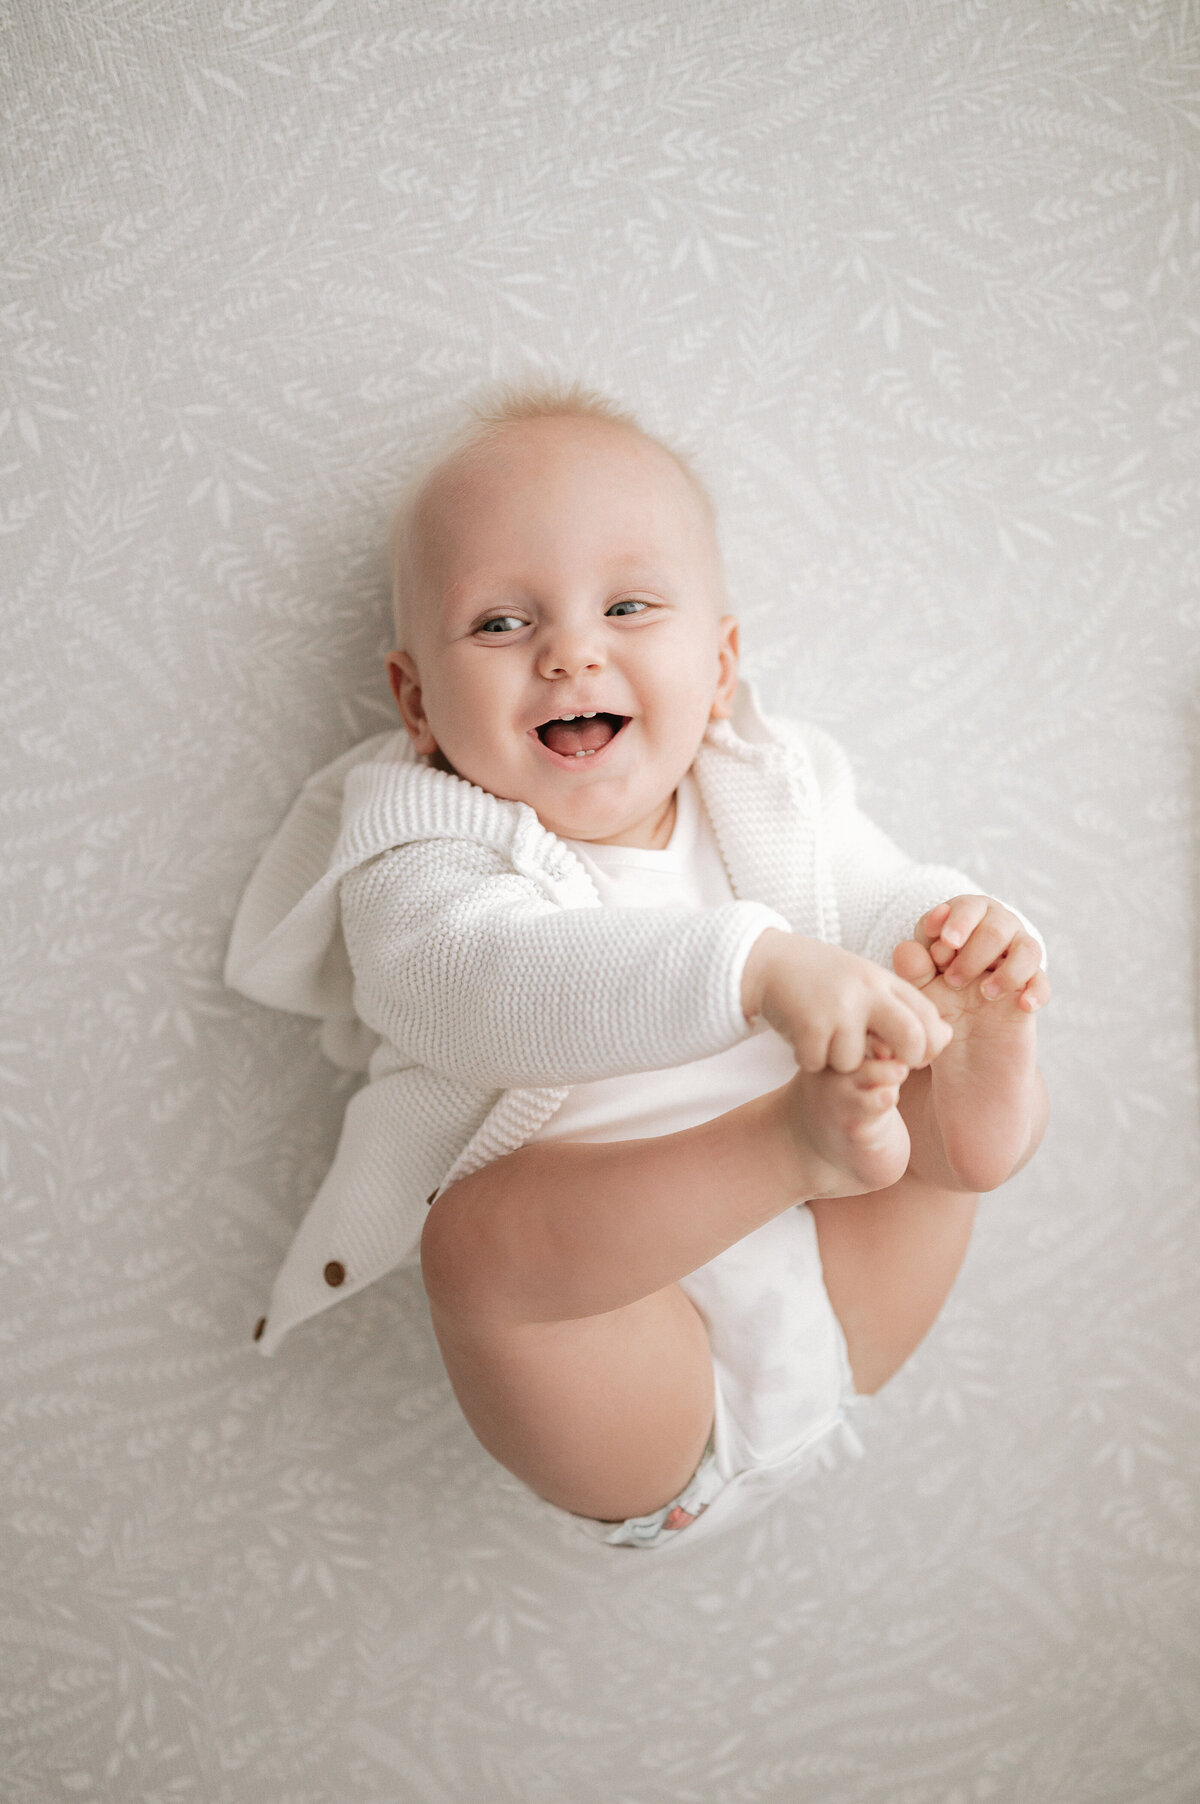 Artistic baby photography of a child laughing